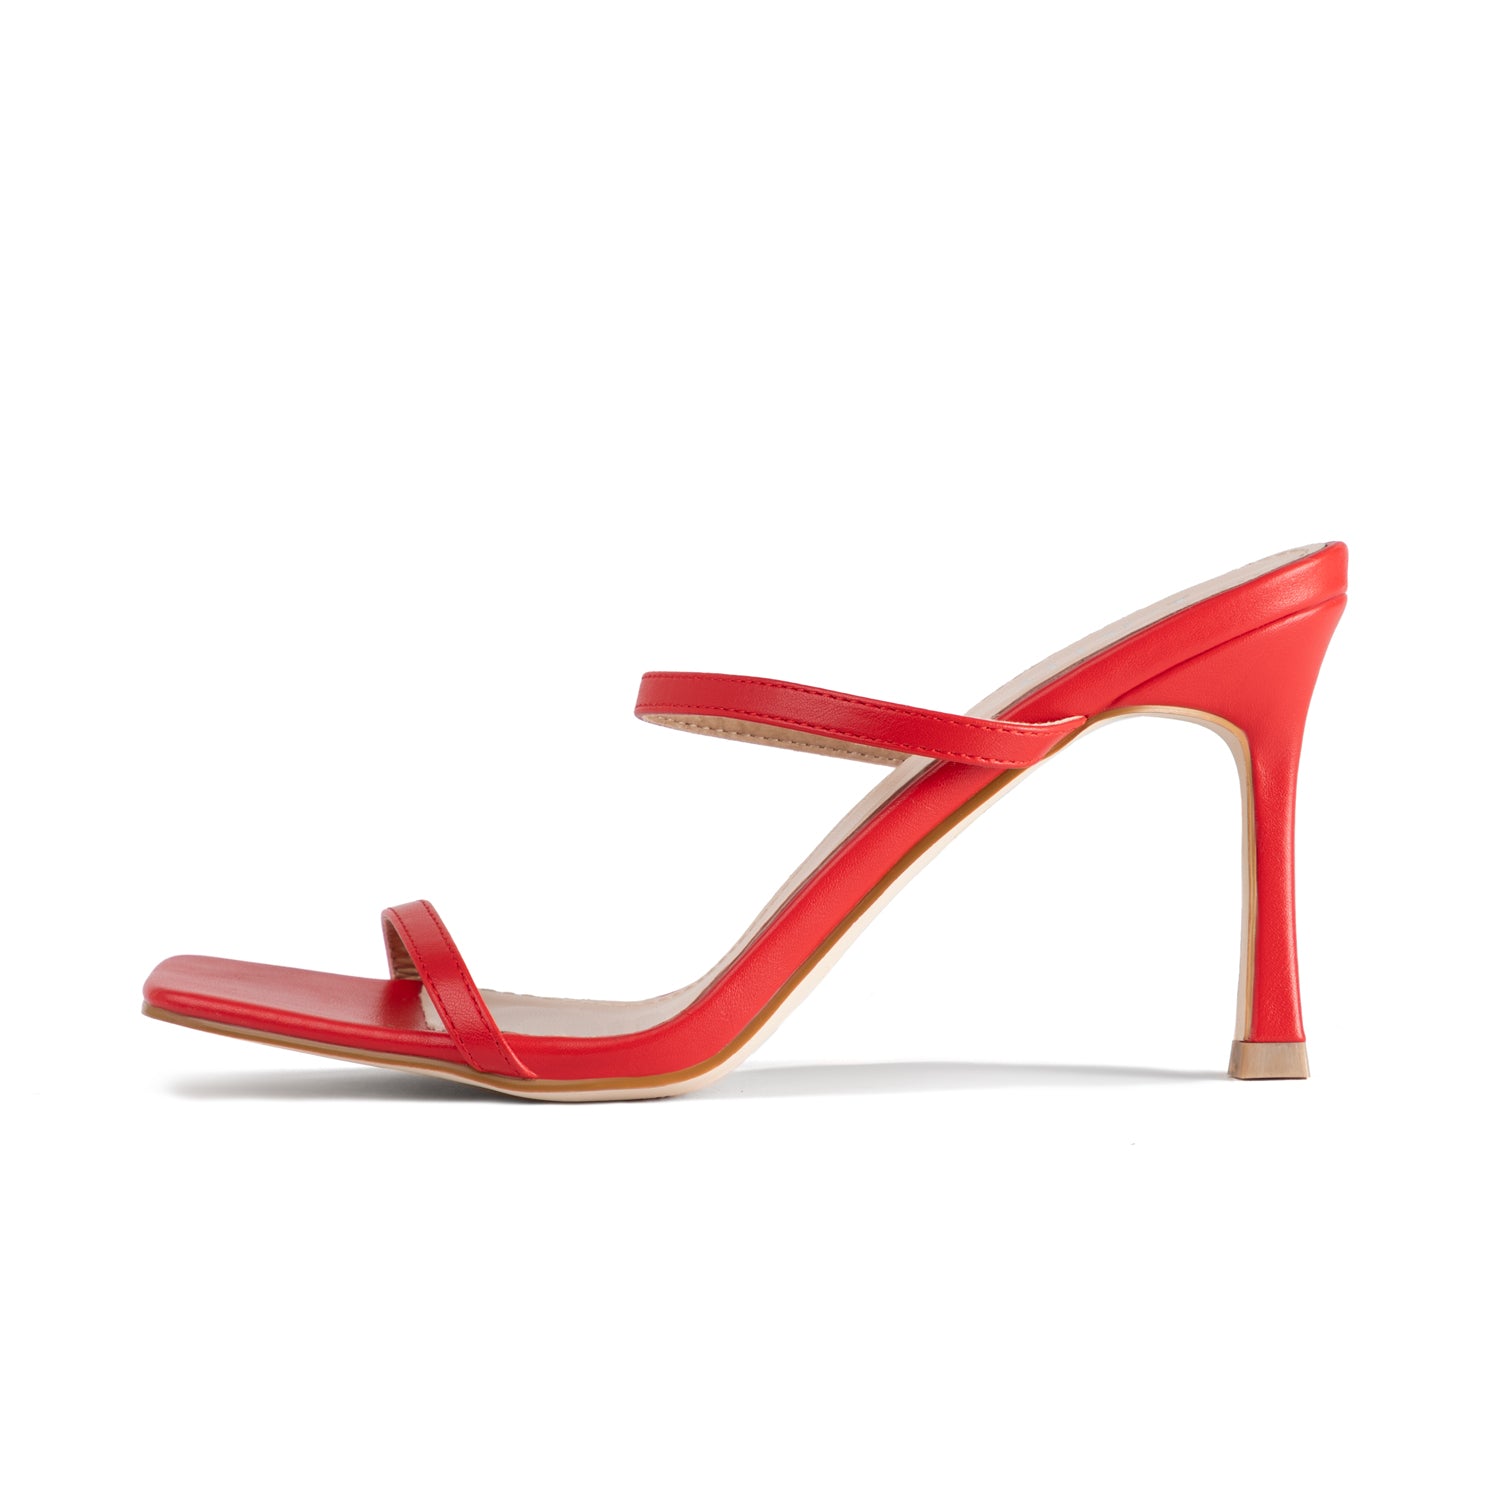 RAID Audley Heeled Mules in Red